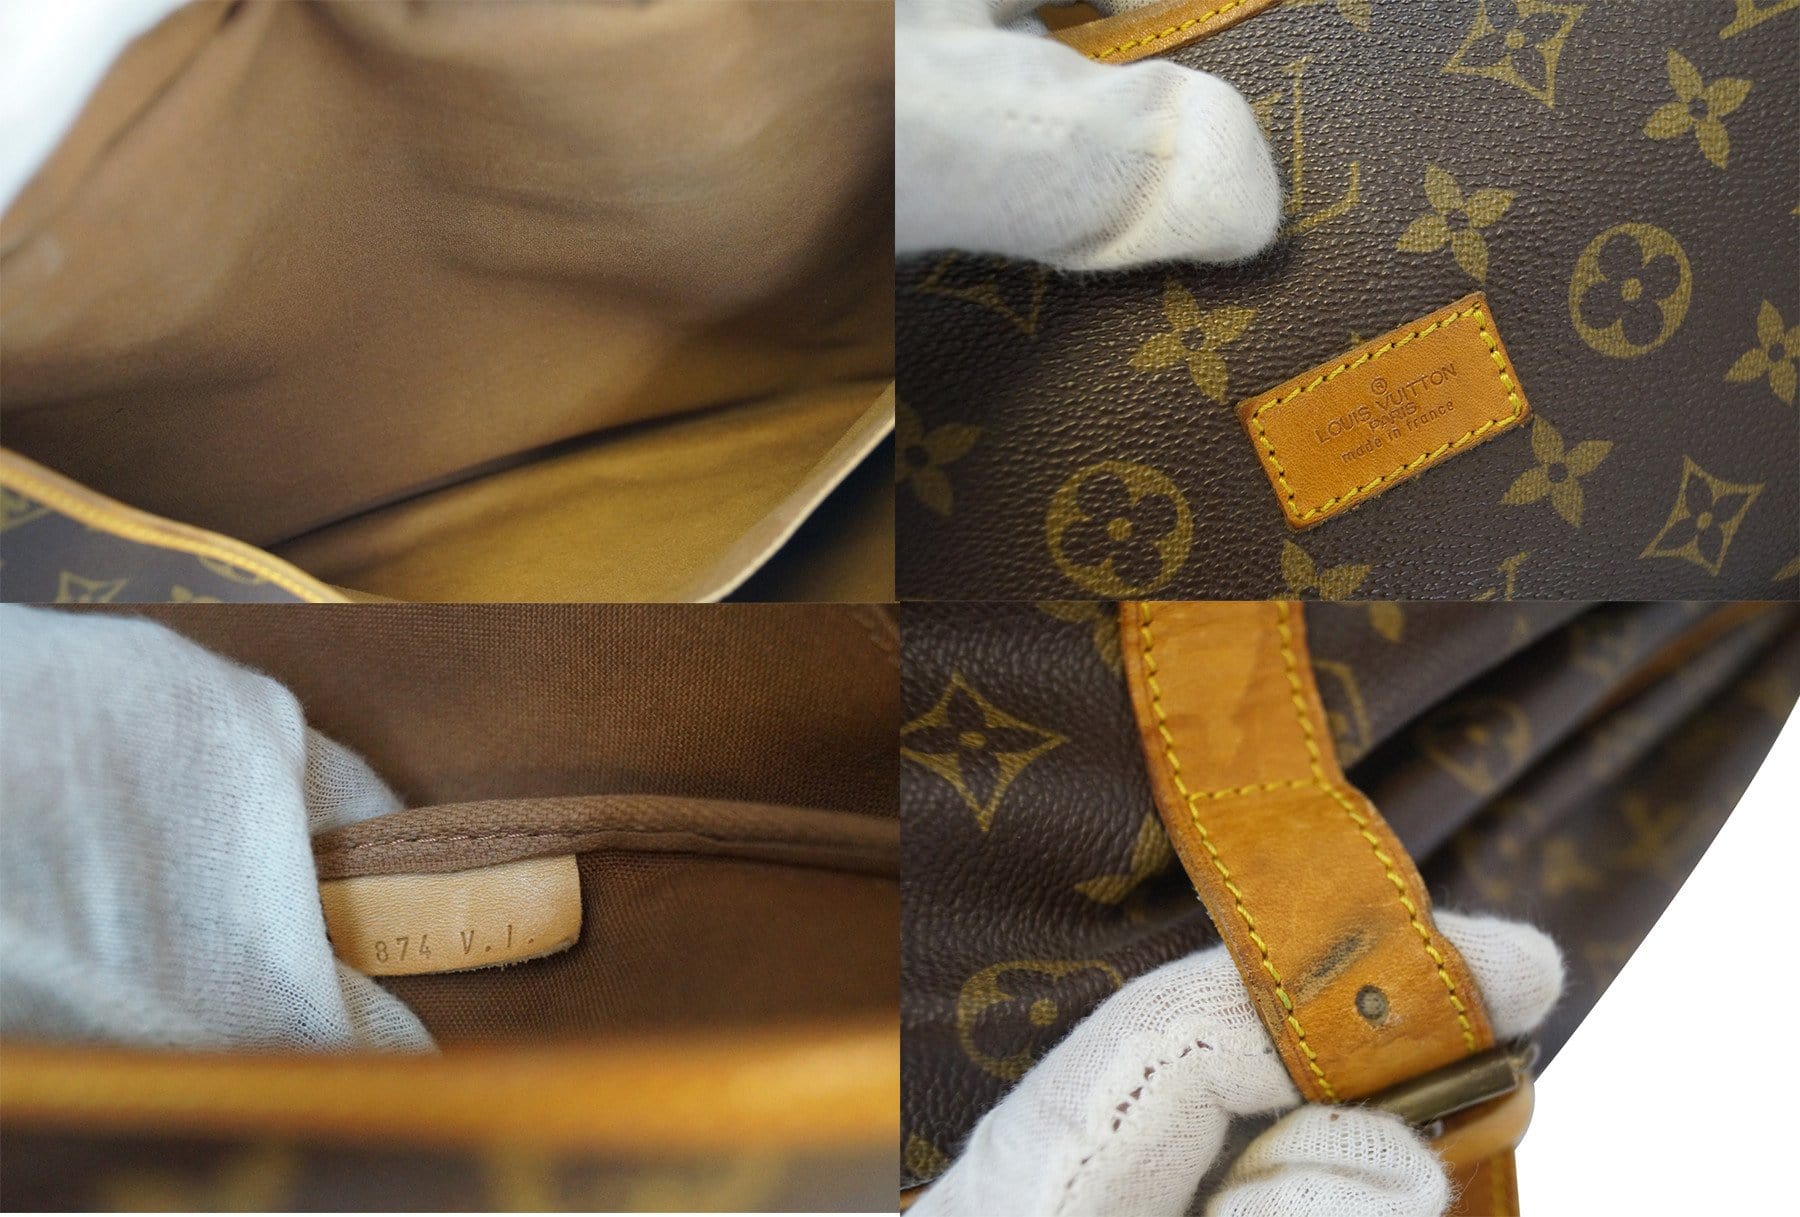 Replacement strap for my Louis Vuitton Saumur 43 